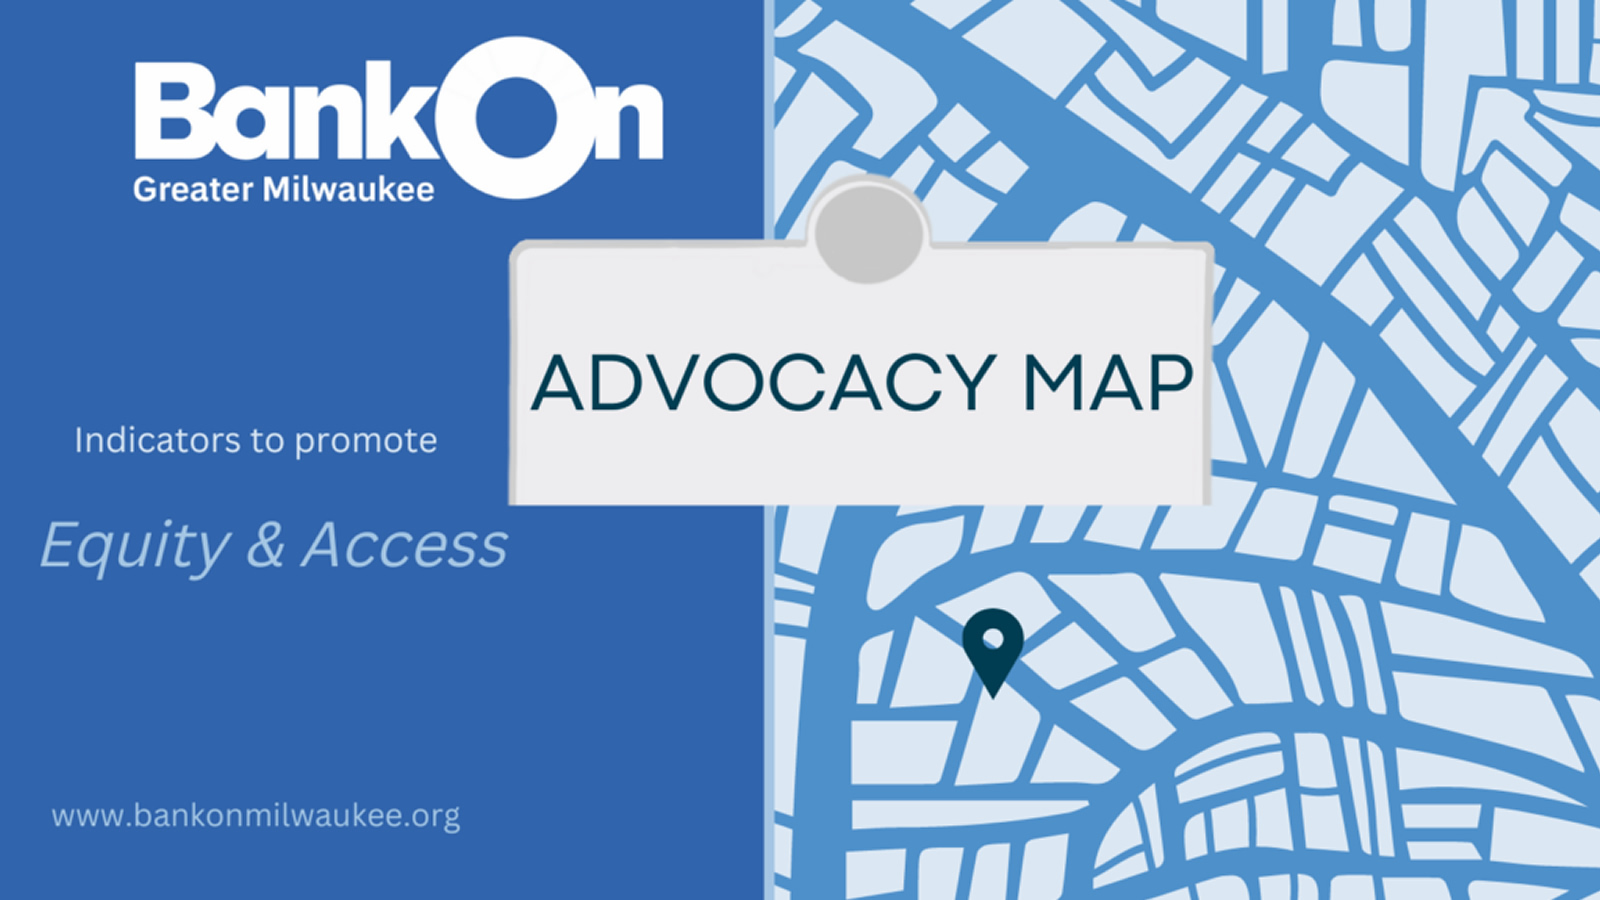 In 2022, Bank On Greater Milwaukee launched the Advocacy Map to advocate for banking expansion and to improve access to banking in the City of Milwaukee. The Advocacy Map is a live interactive map of the City of Milwaukee along with the location of banks and payday lending stores and their service areas.